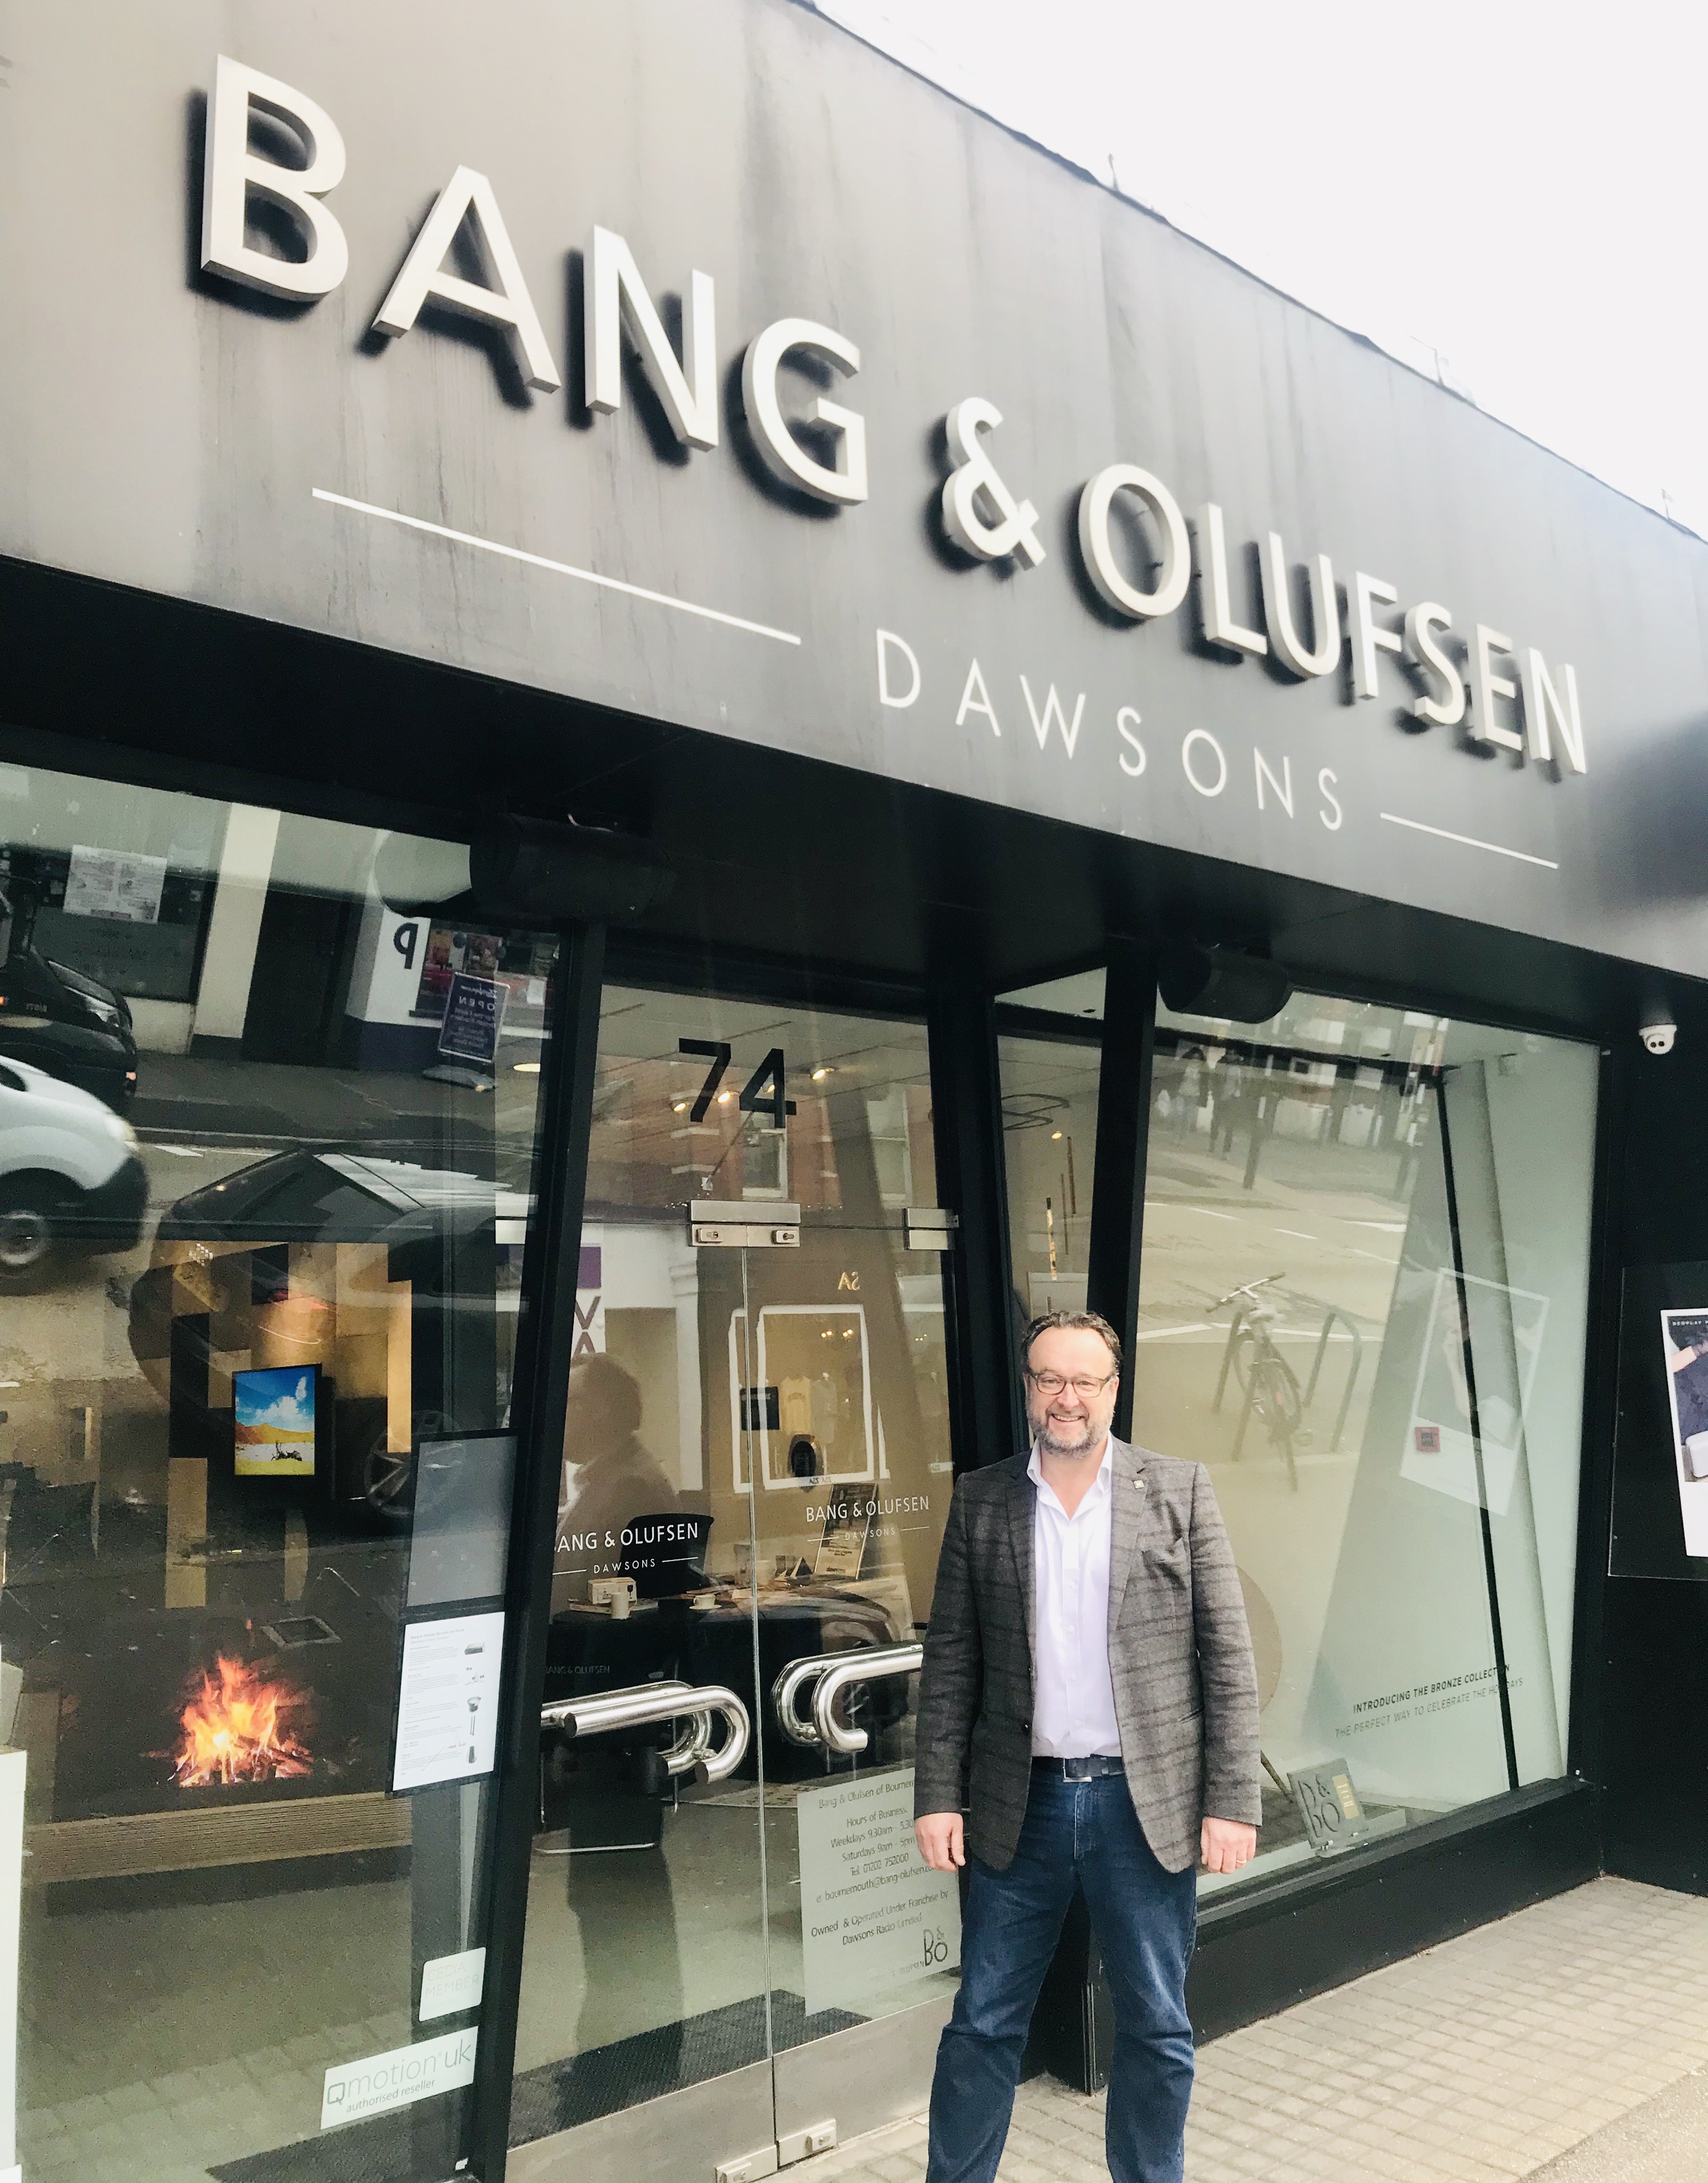 Dawsons B & O in Westbourne recognised by Bang & Olufsen worldwide  – an innovative business ever evolving with the times